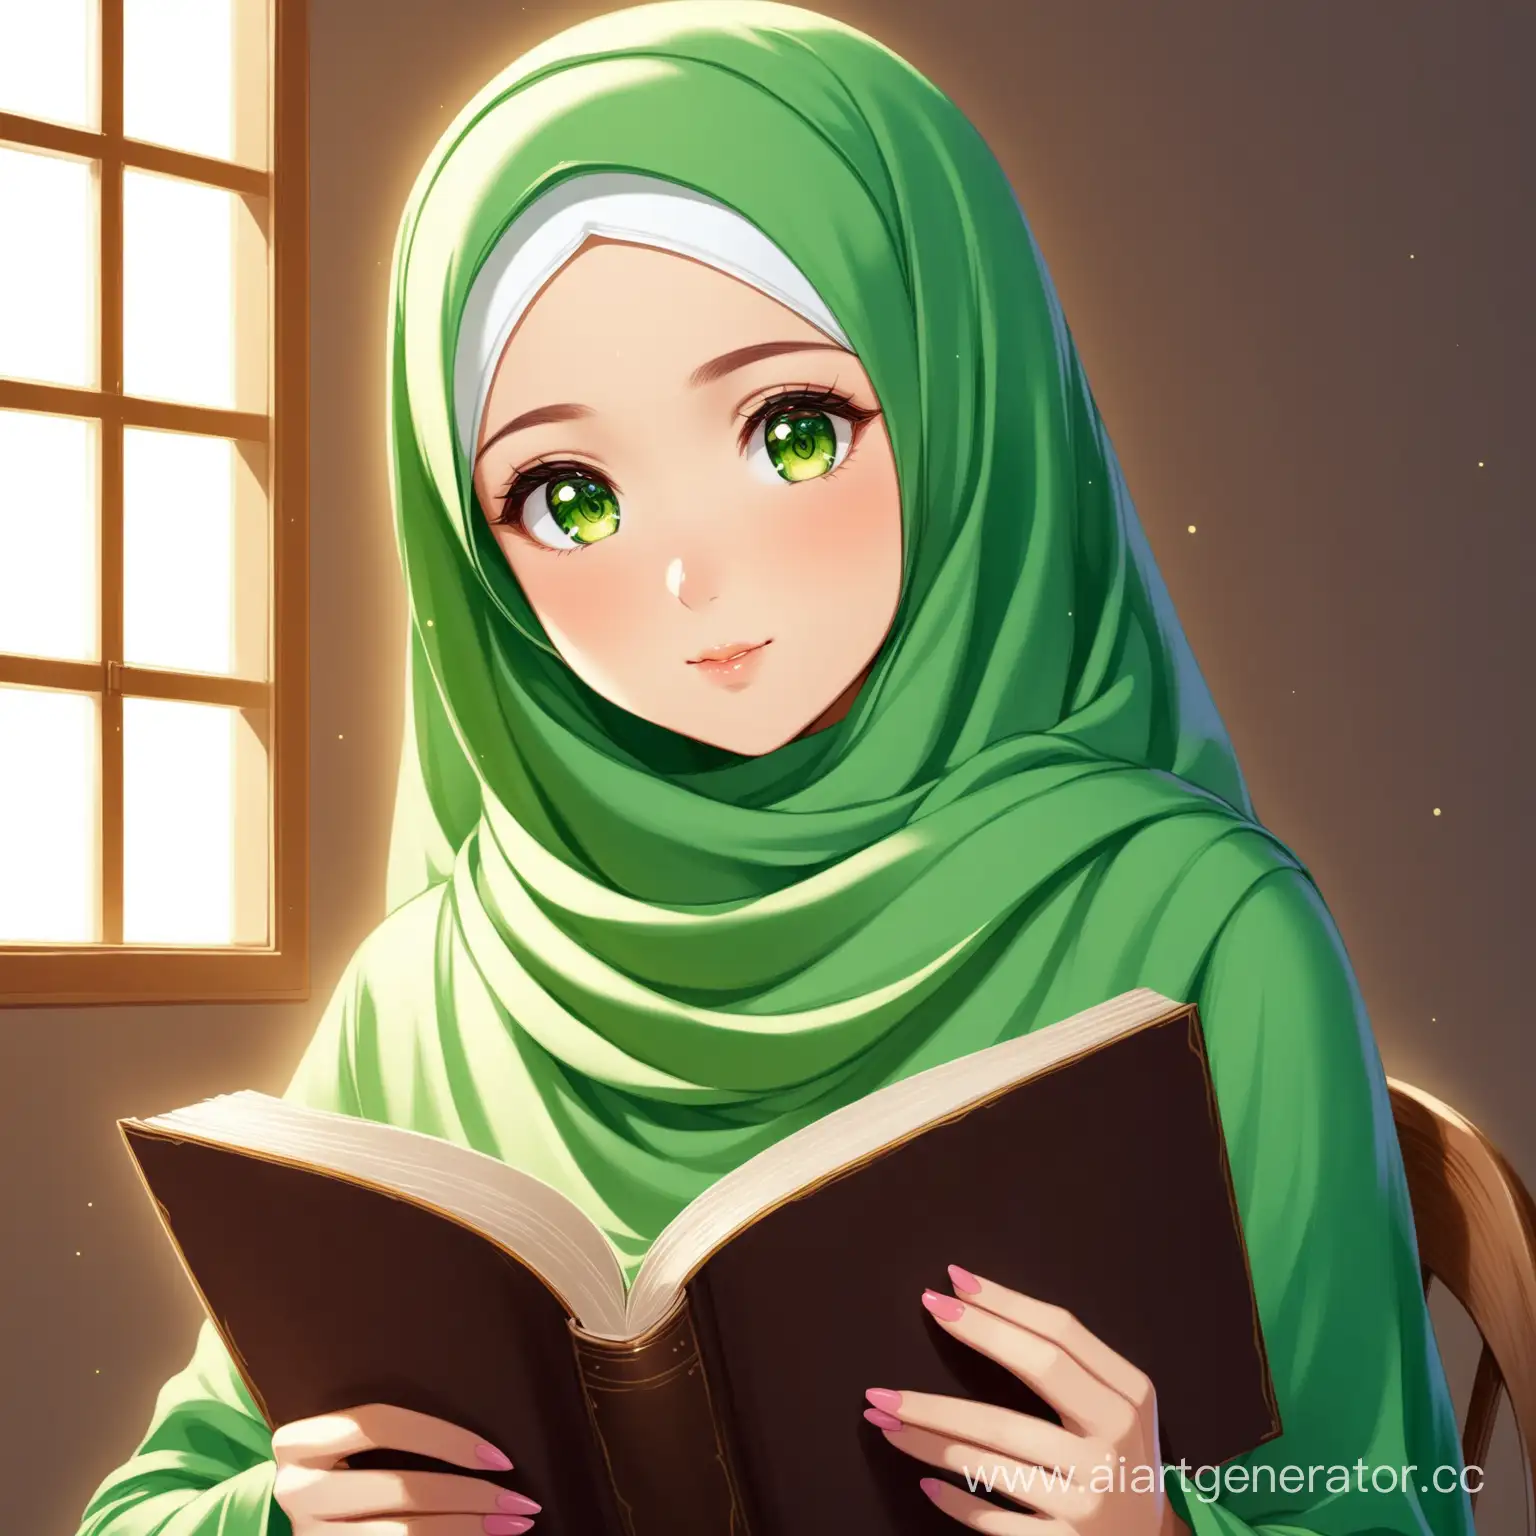 Intelligent-Hijabi-Girl-Engrossed-in-Reading-with-Captivating-Green-Eyes